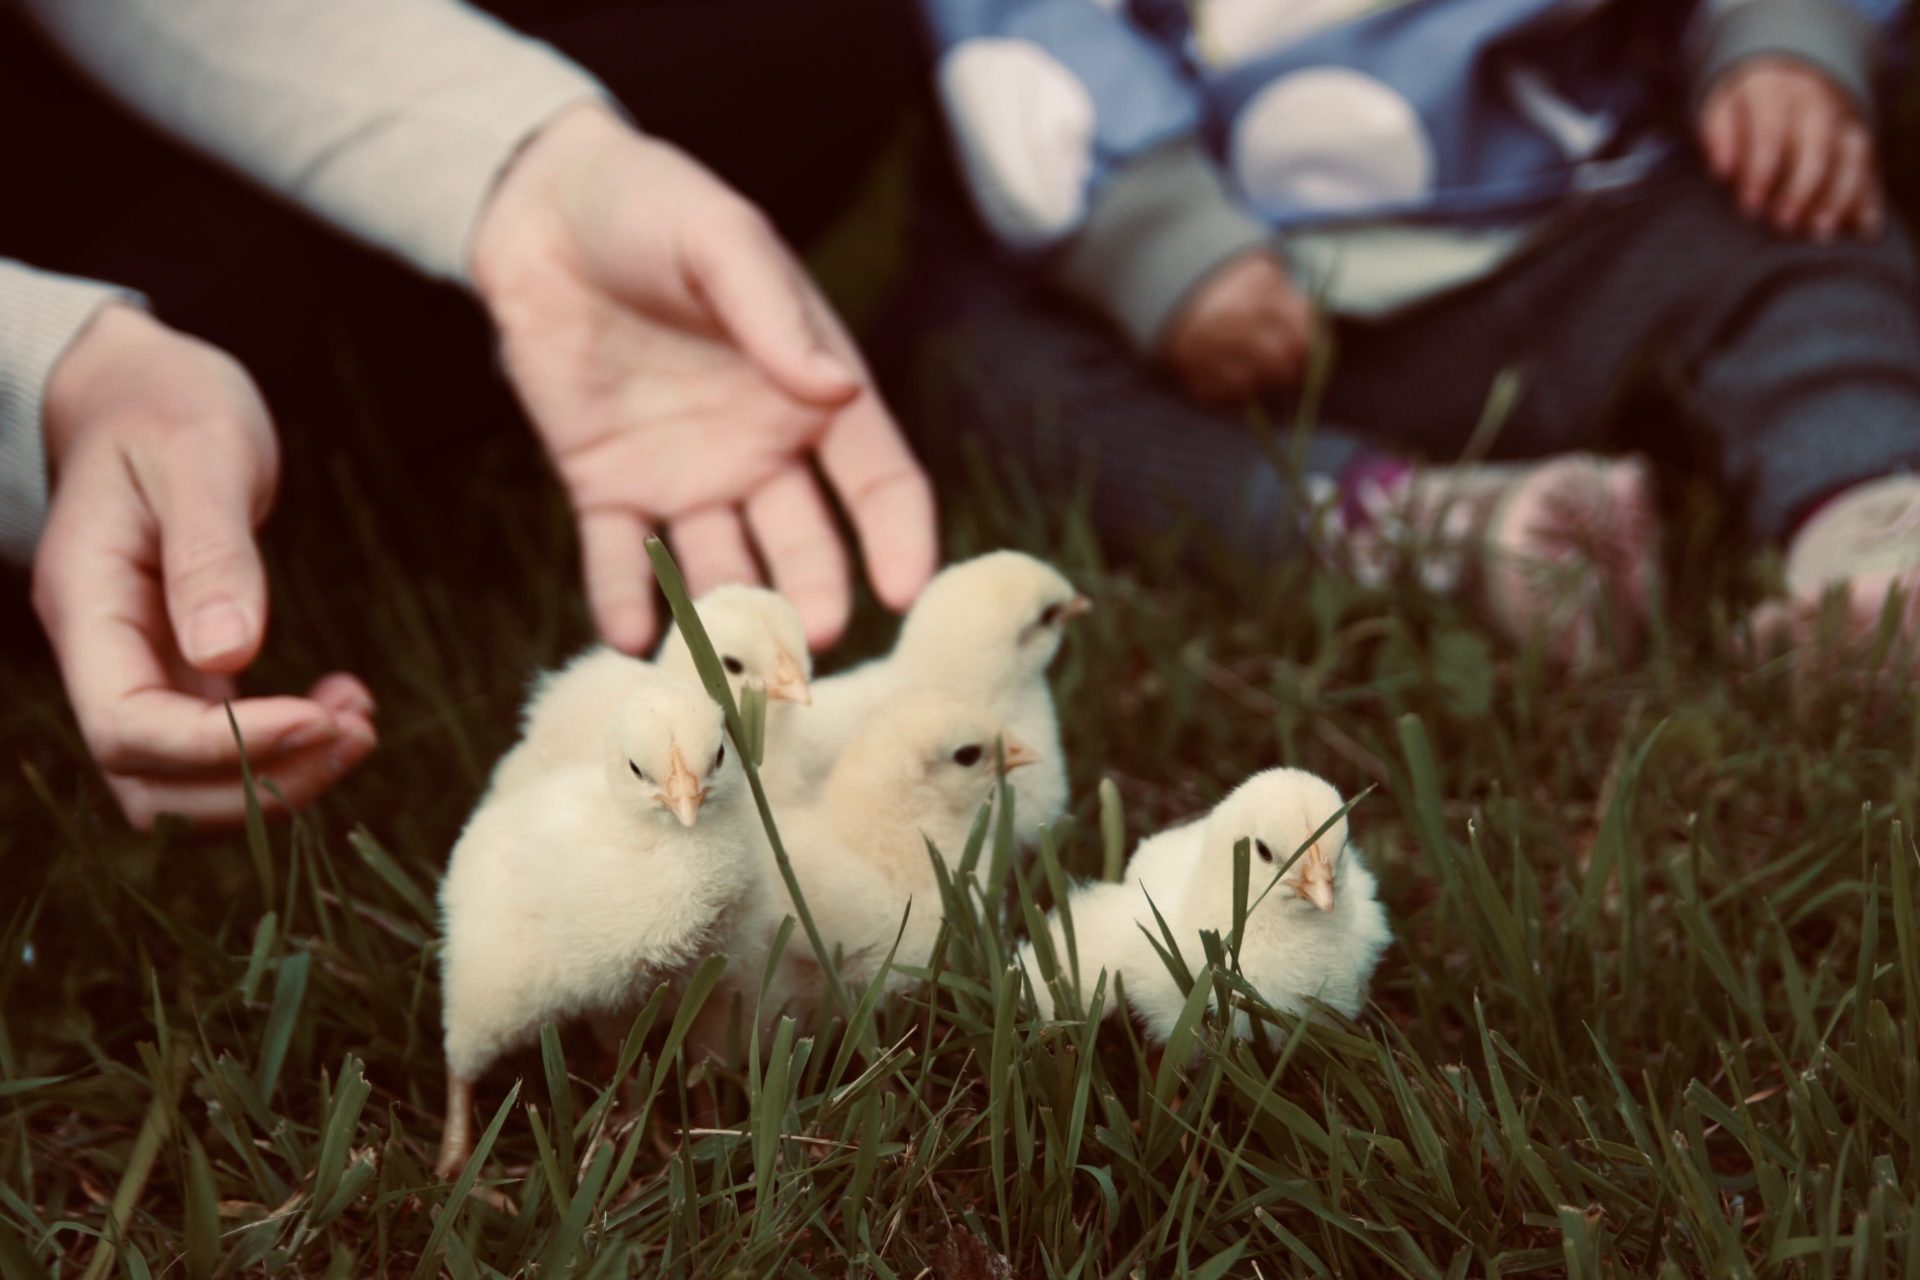 Five yellow chicken babies in the green grass, hands reaching out, toddler in the background